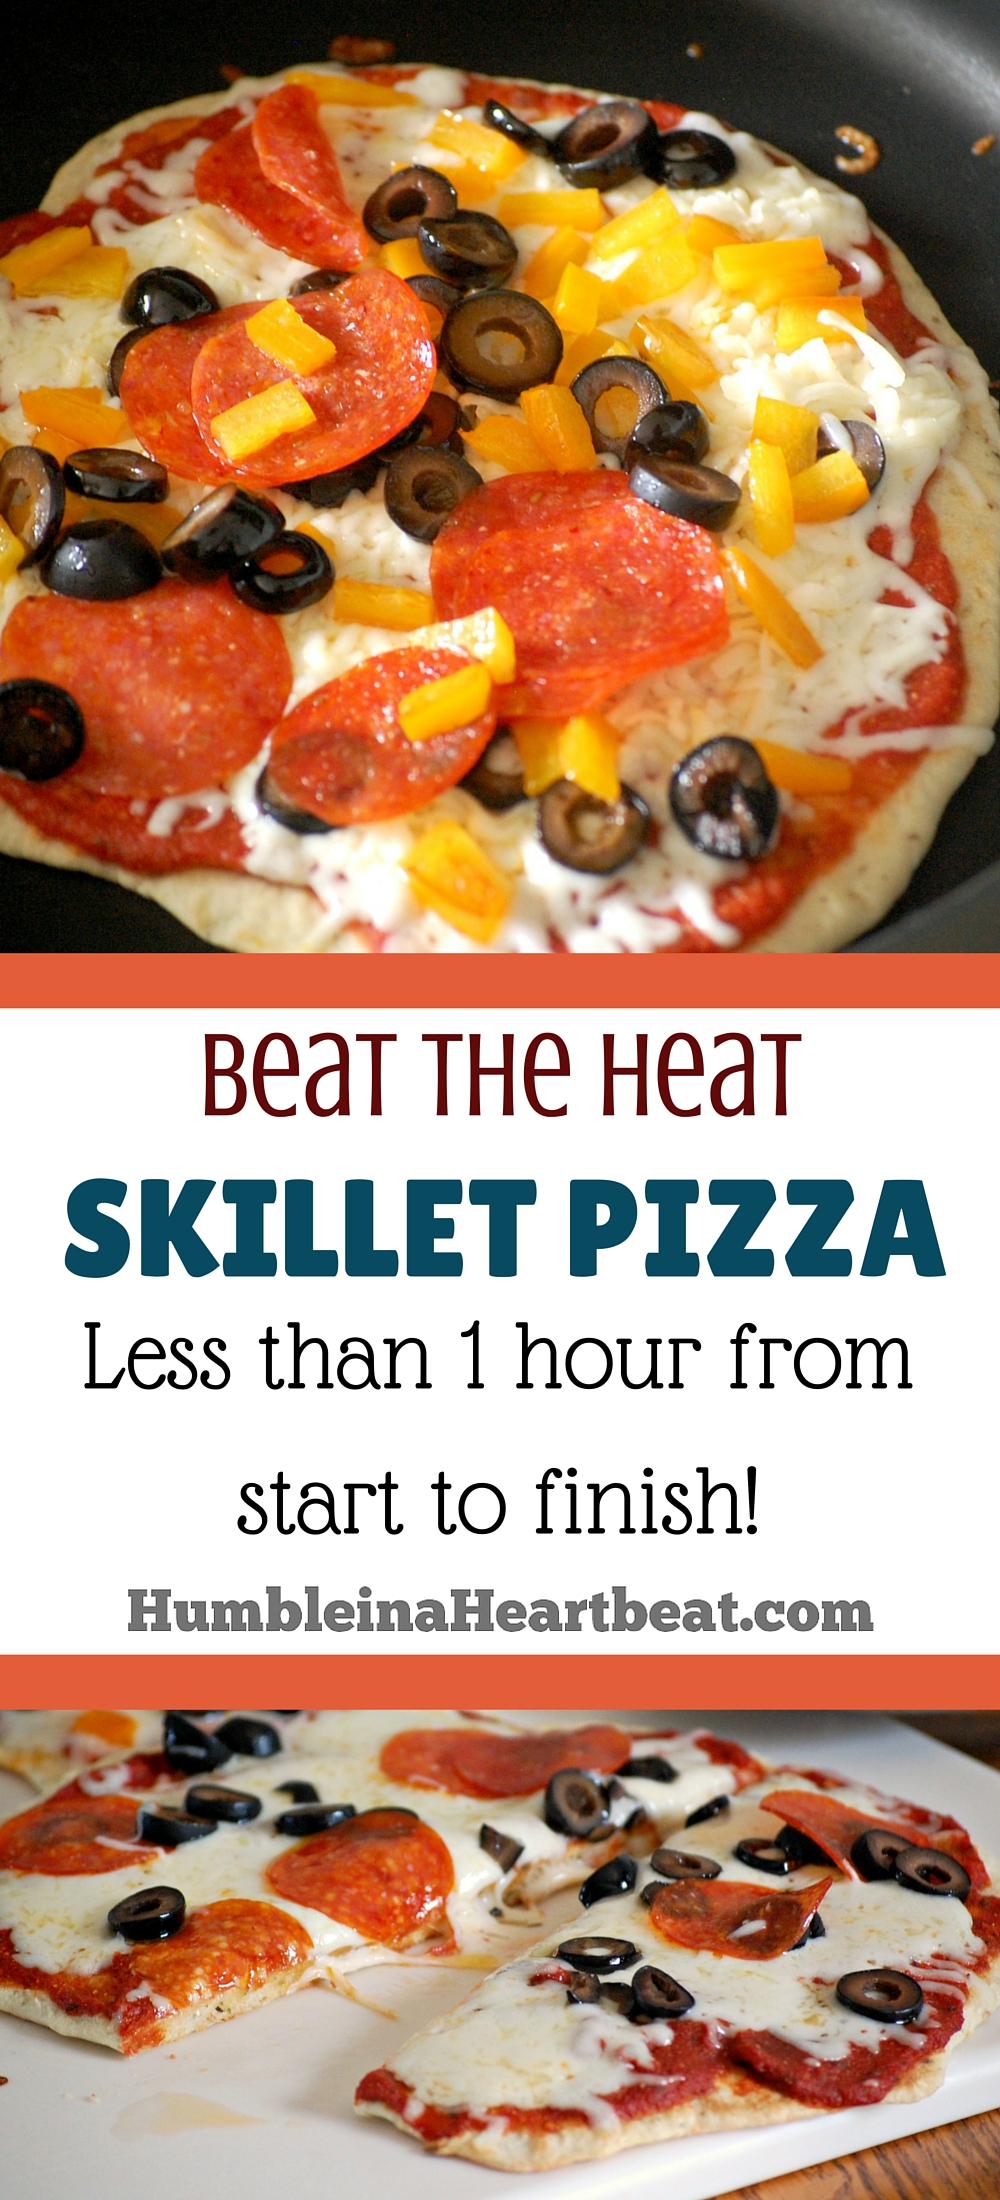 Don't turn on the oven to make pizza this summer! Use a skillet instead, and get some of the best pizza you've ever had in under an hour.